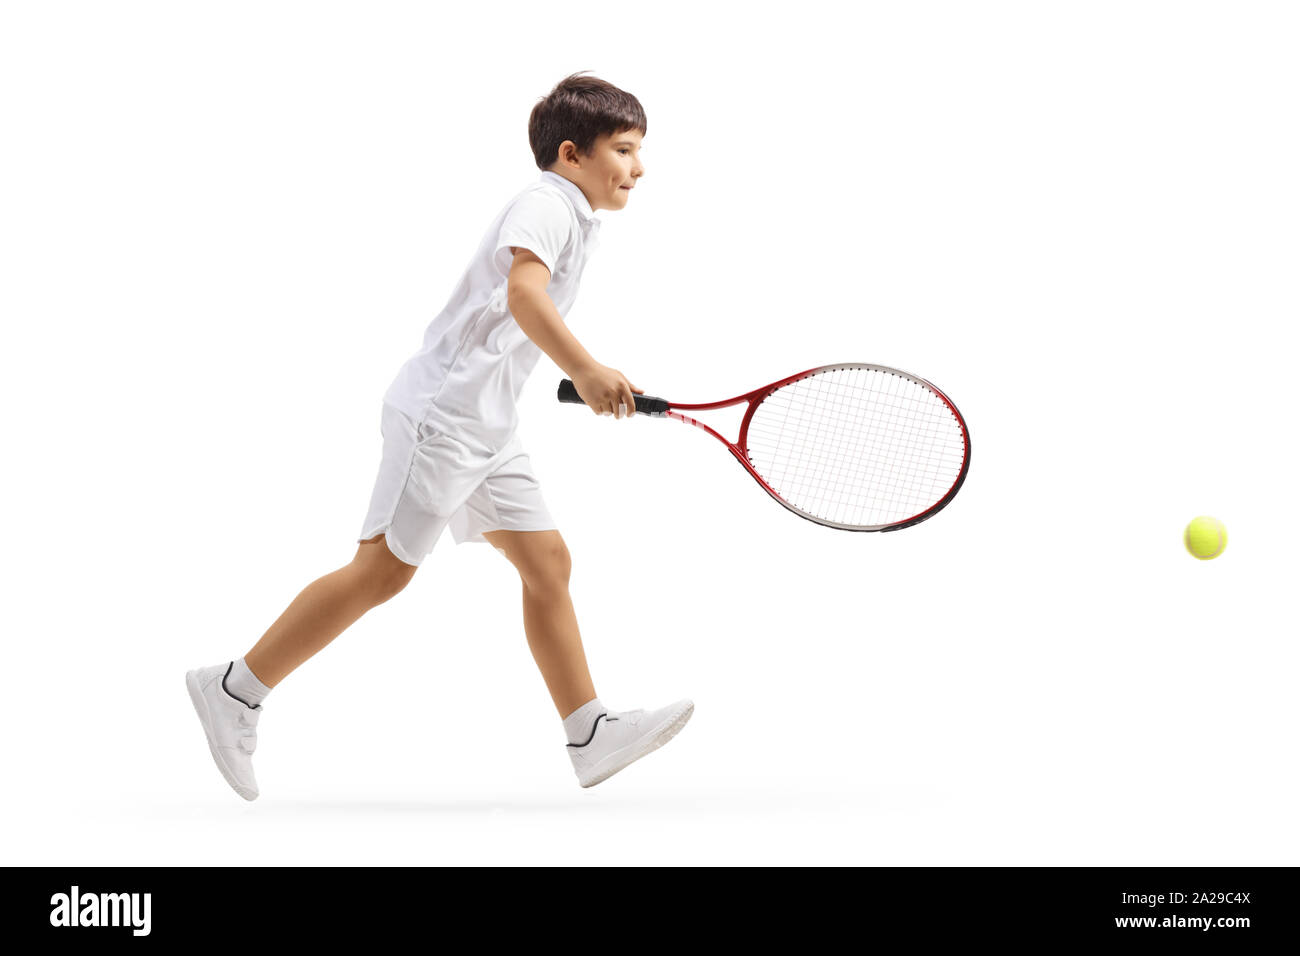 Full length profile shot of a boy running to hit a tennis ball isolated on white background Stock Photo